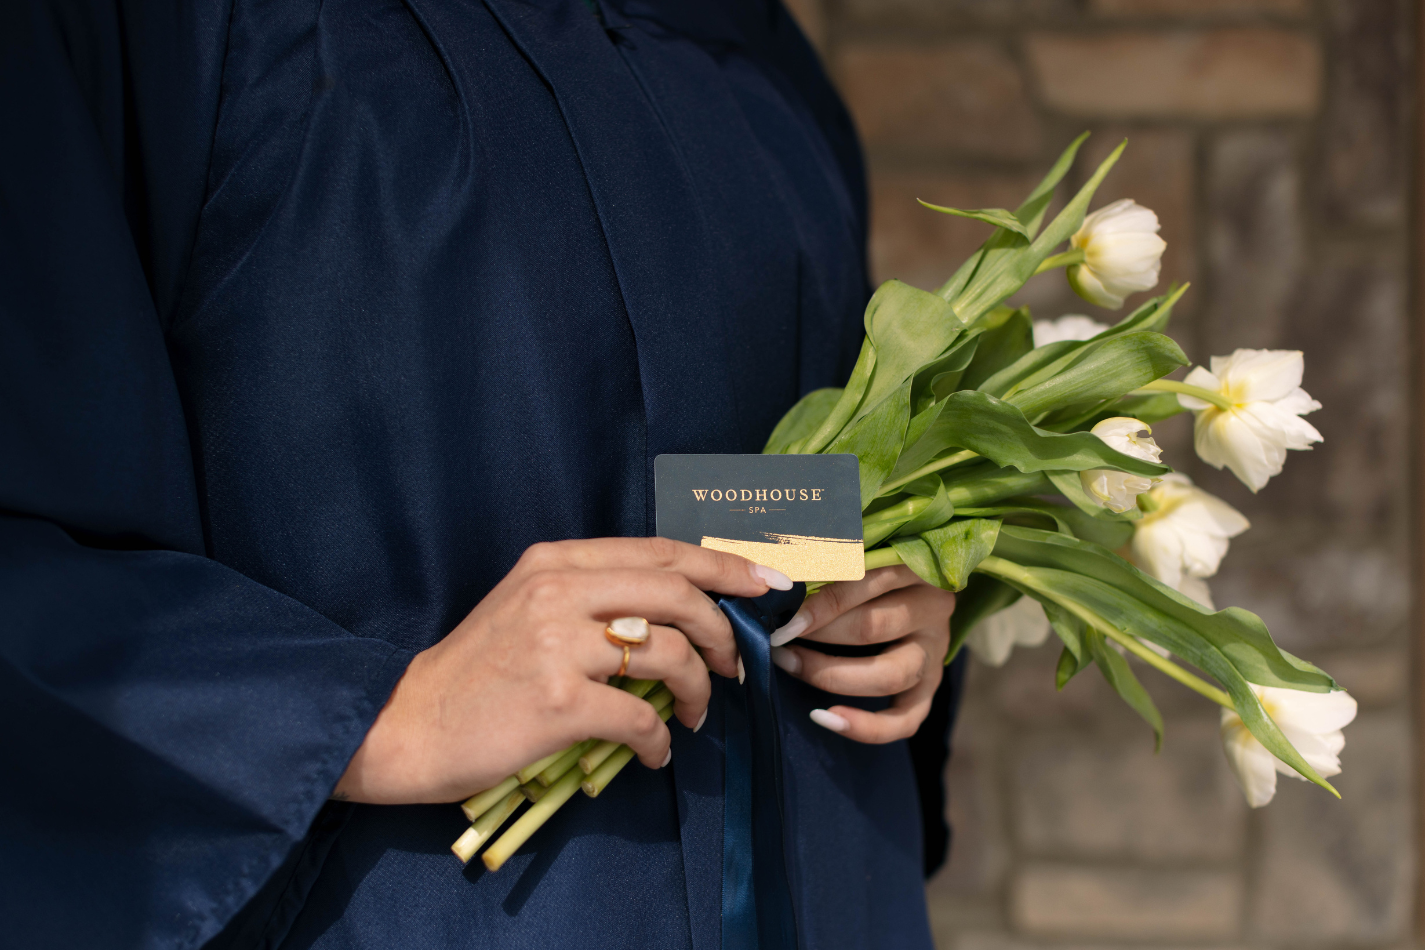 graduate holding gift card and flowers